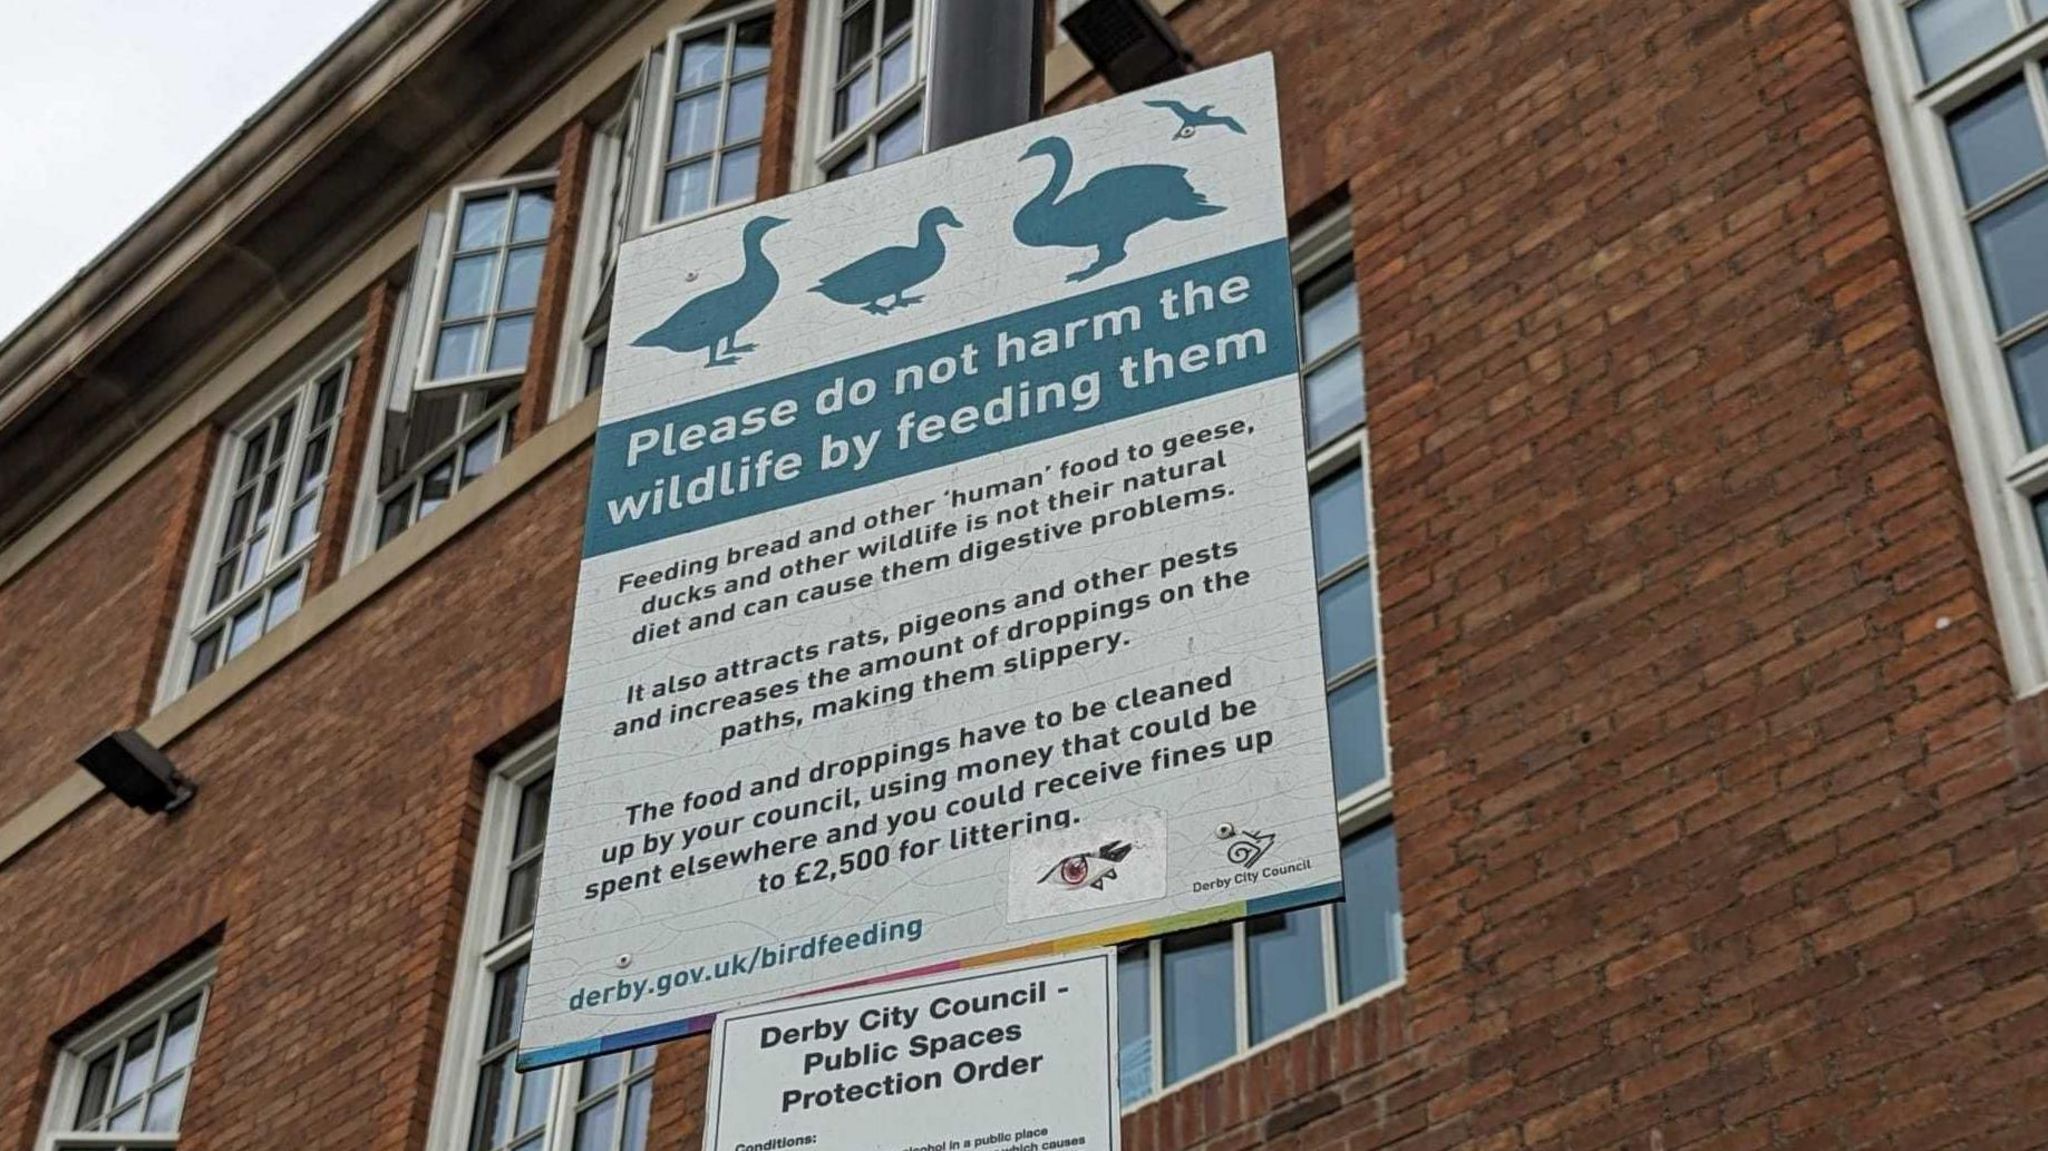 Derby City Council sign asking people not to feed birds